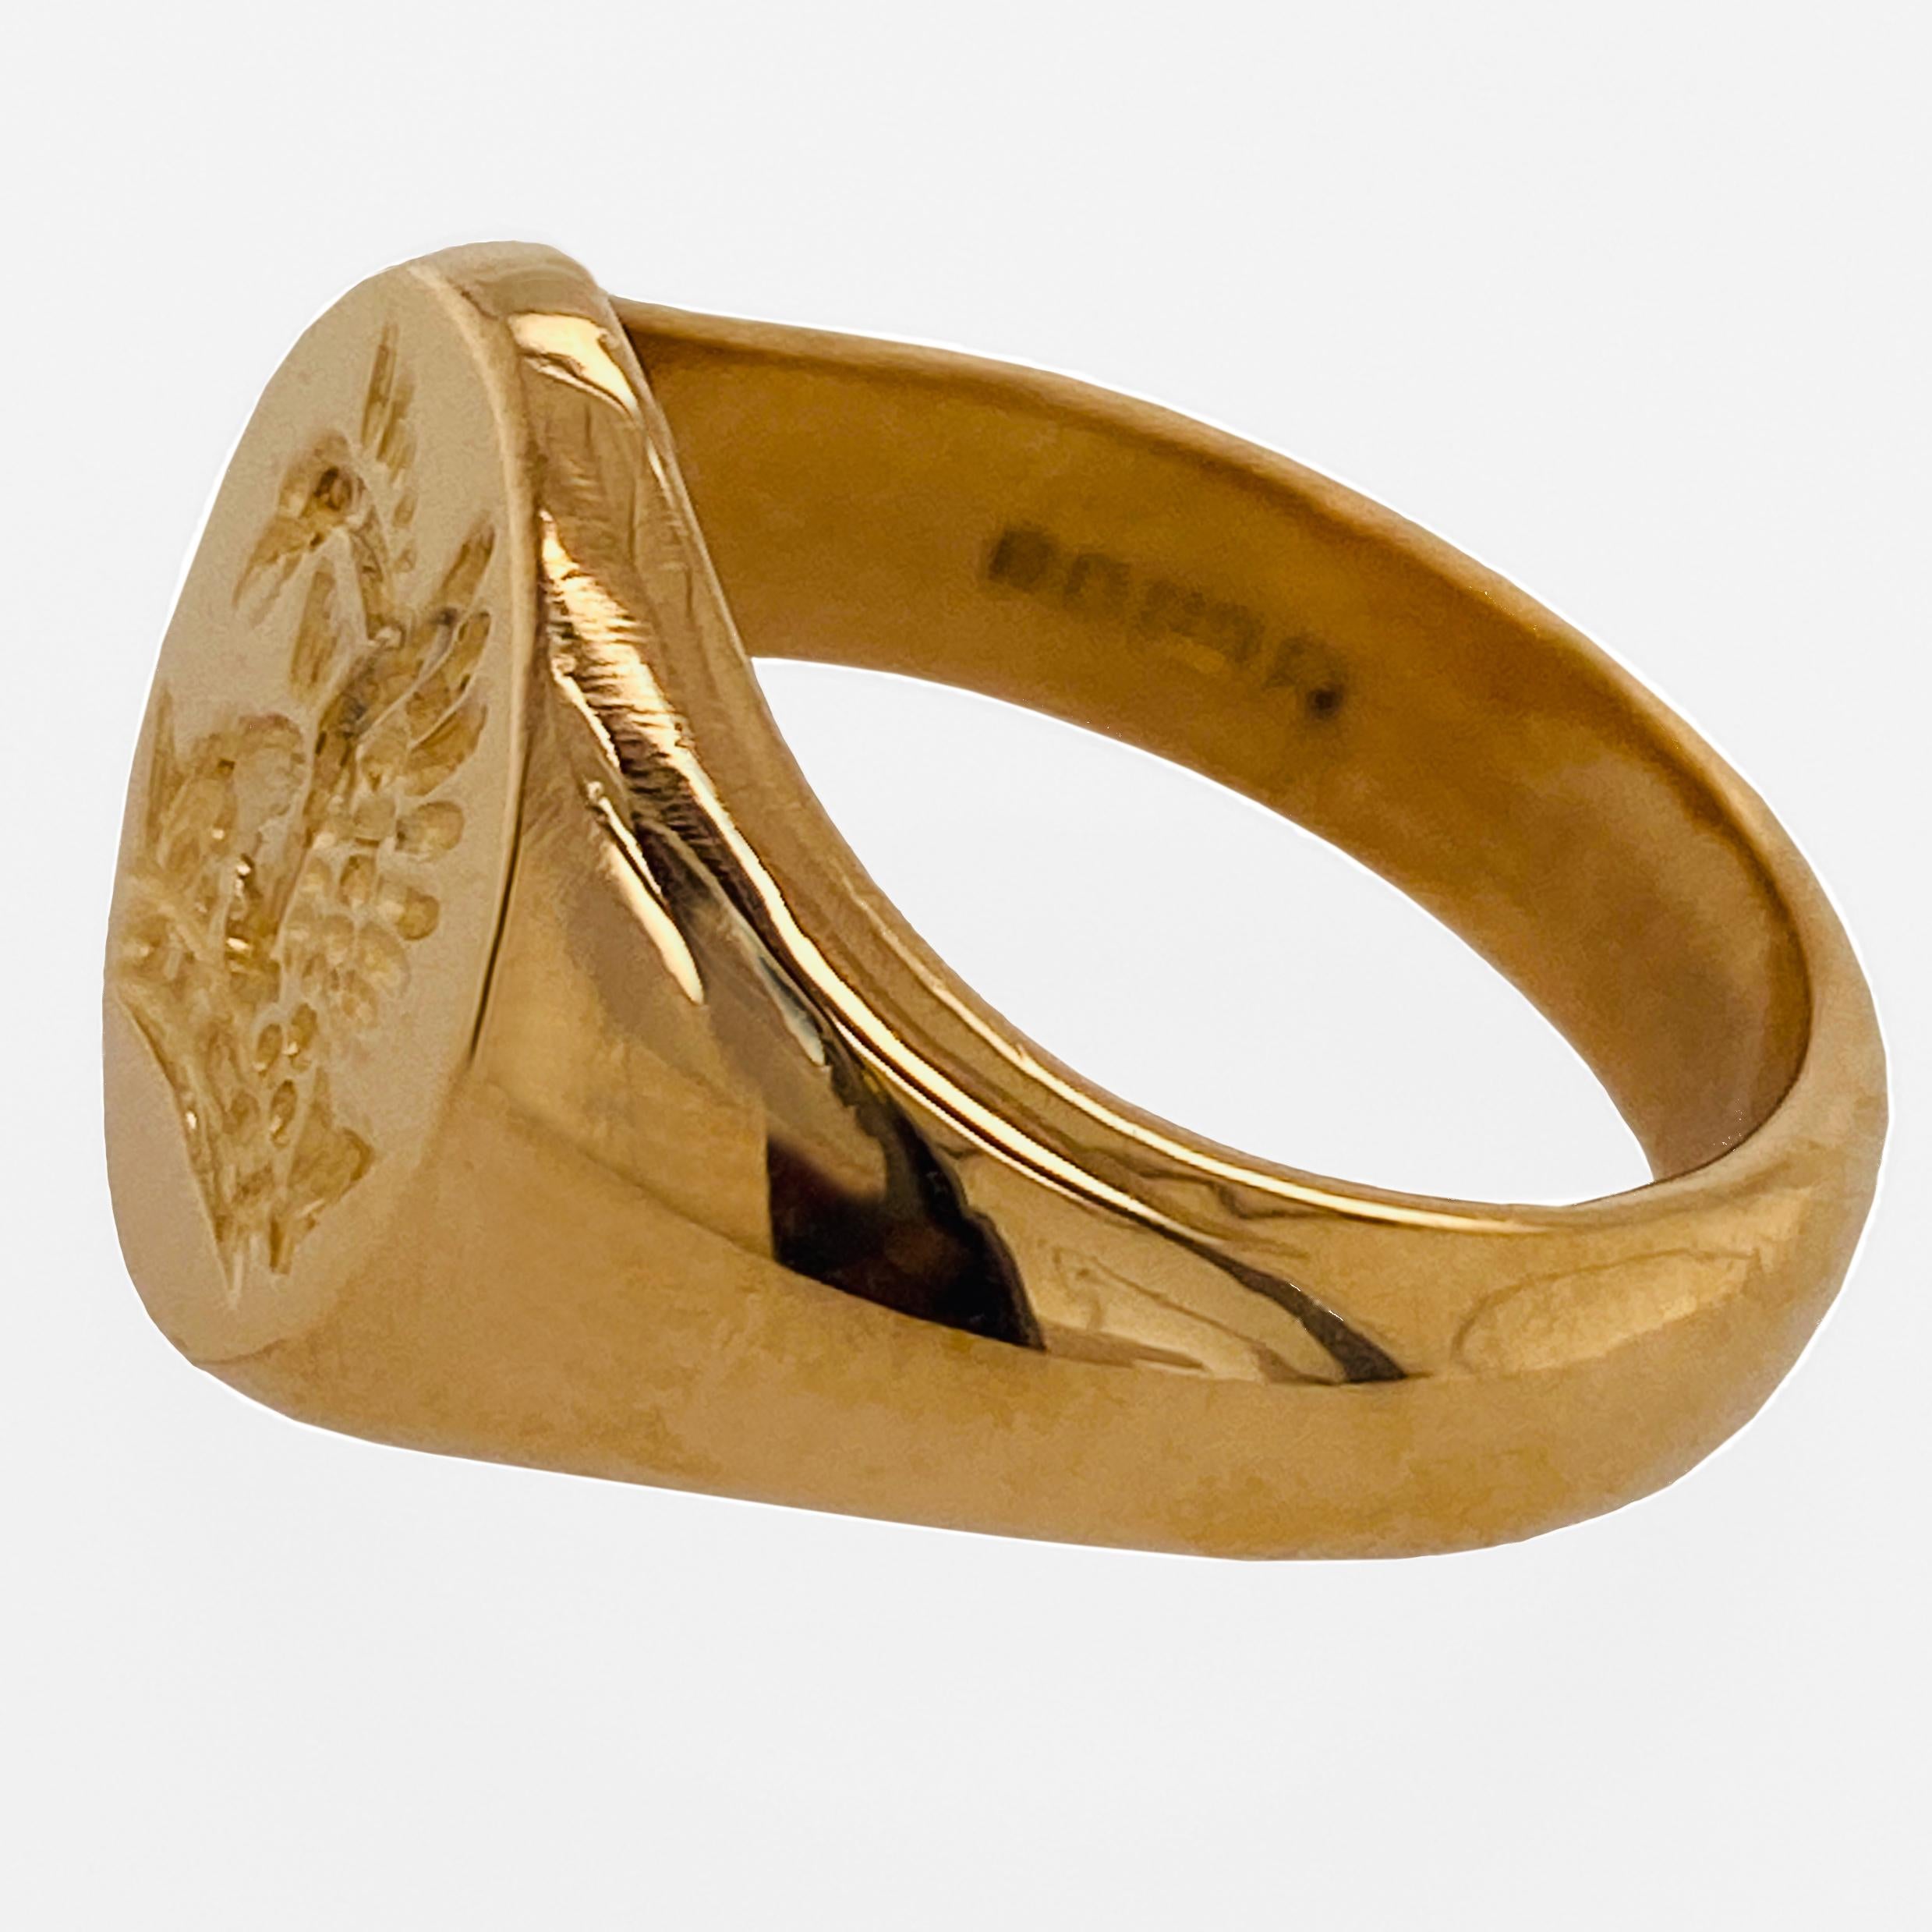 Contemporary Rising Phoenix Signet Ring in 22 Carat Yellow Gold